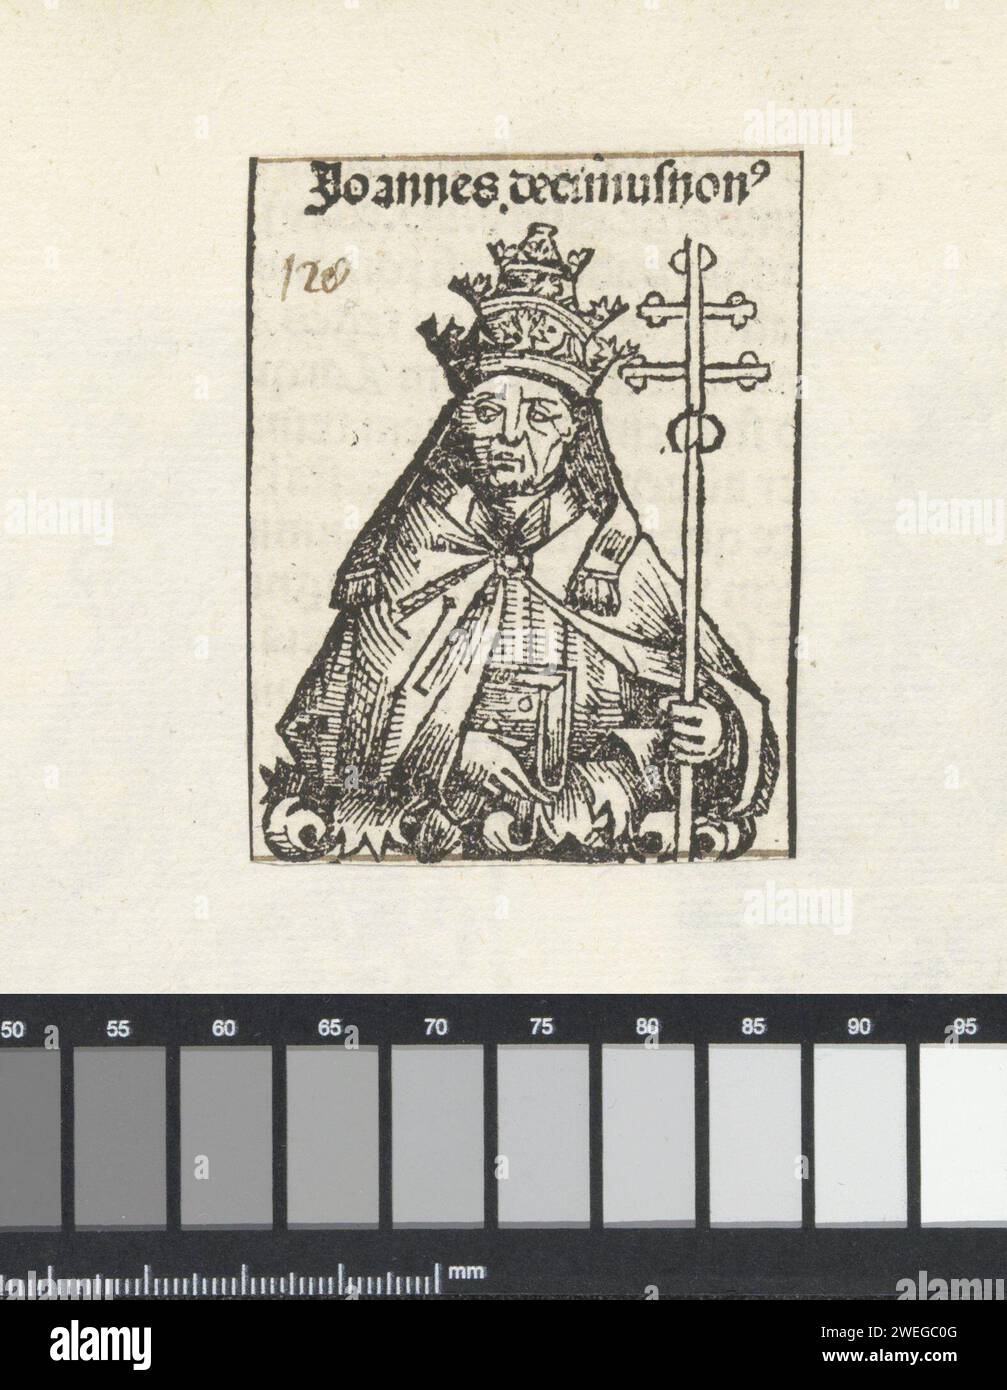 Pause Johannes XVIII of XIX, Michel Wolldel (Workshop), 1493 print A flower challenge with a pope. He is wearing a tiara and has a Bible and a staff with a double cross in his hands. The performance is part of the succession popes in the Liber Chronicarum. The man identifies the man as John Xix, but according to the series, John XVIII is intended. The print is part of an album.  paper letterpress printing pope Stock Photo